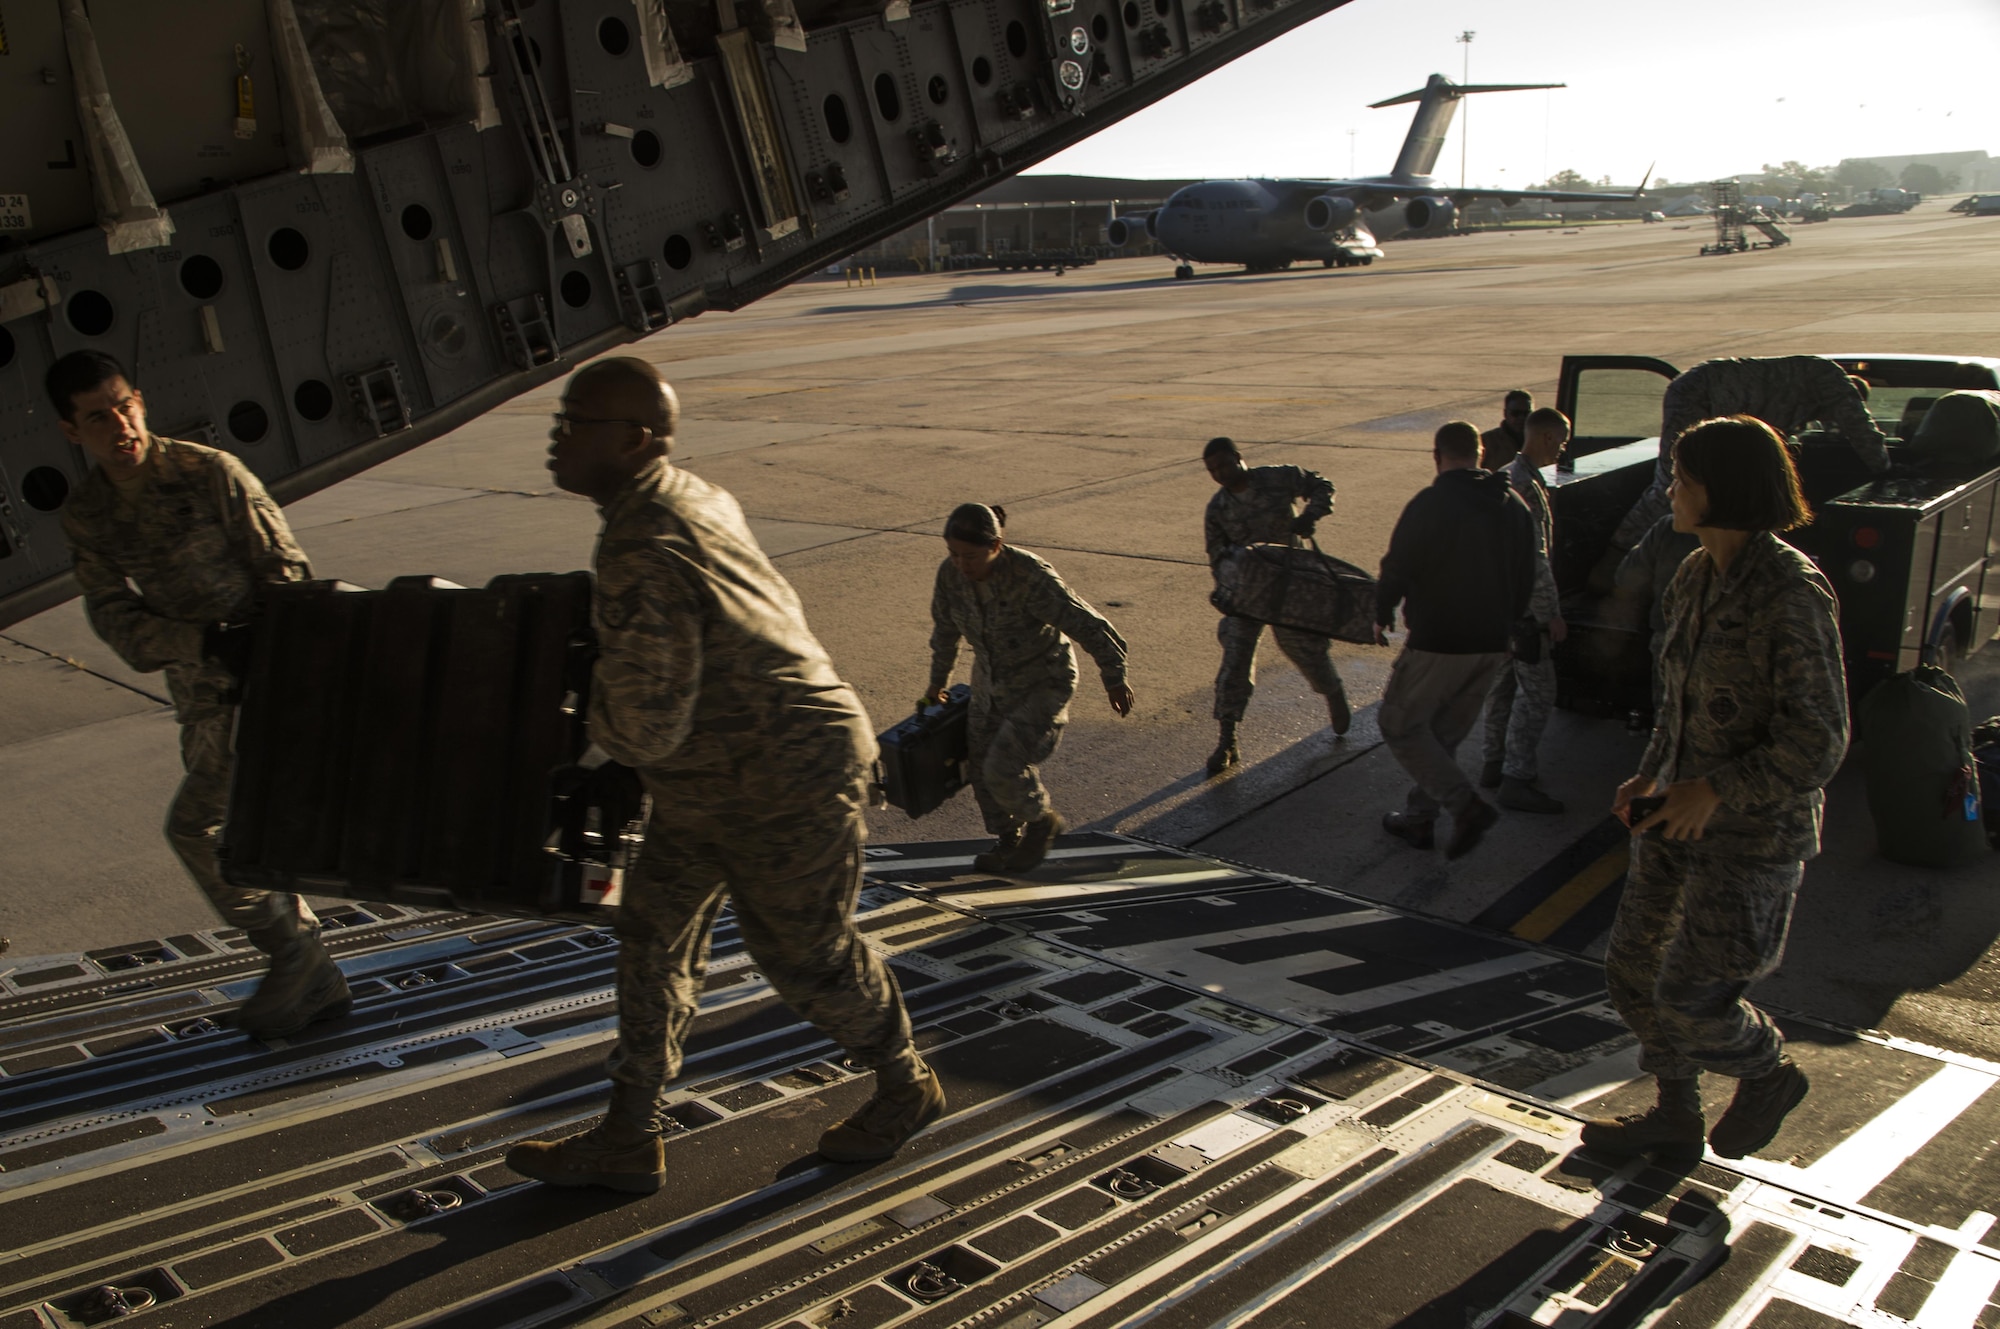 Members of the 621st Contingency Response Wing load equipment onto a C-17 Globemaster III at Joint Base McGuire-Dix-Lakehurst, N.J. before departing to support humanitarian relief efforts Port-au-Prince, Haiti, in response to Hurricane Matthew, October 6, 2016. Once on the ground, the CRW will provide assistance by facilitating the movement of humanitarian aid and cargo. (U.S. Air Force photo by Tech. Sgt. Gustavo Gonzalez/Released)